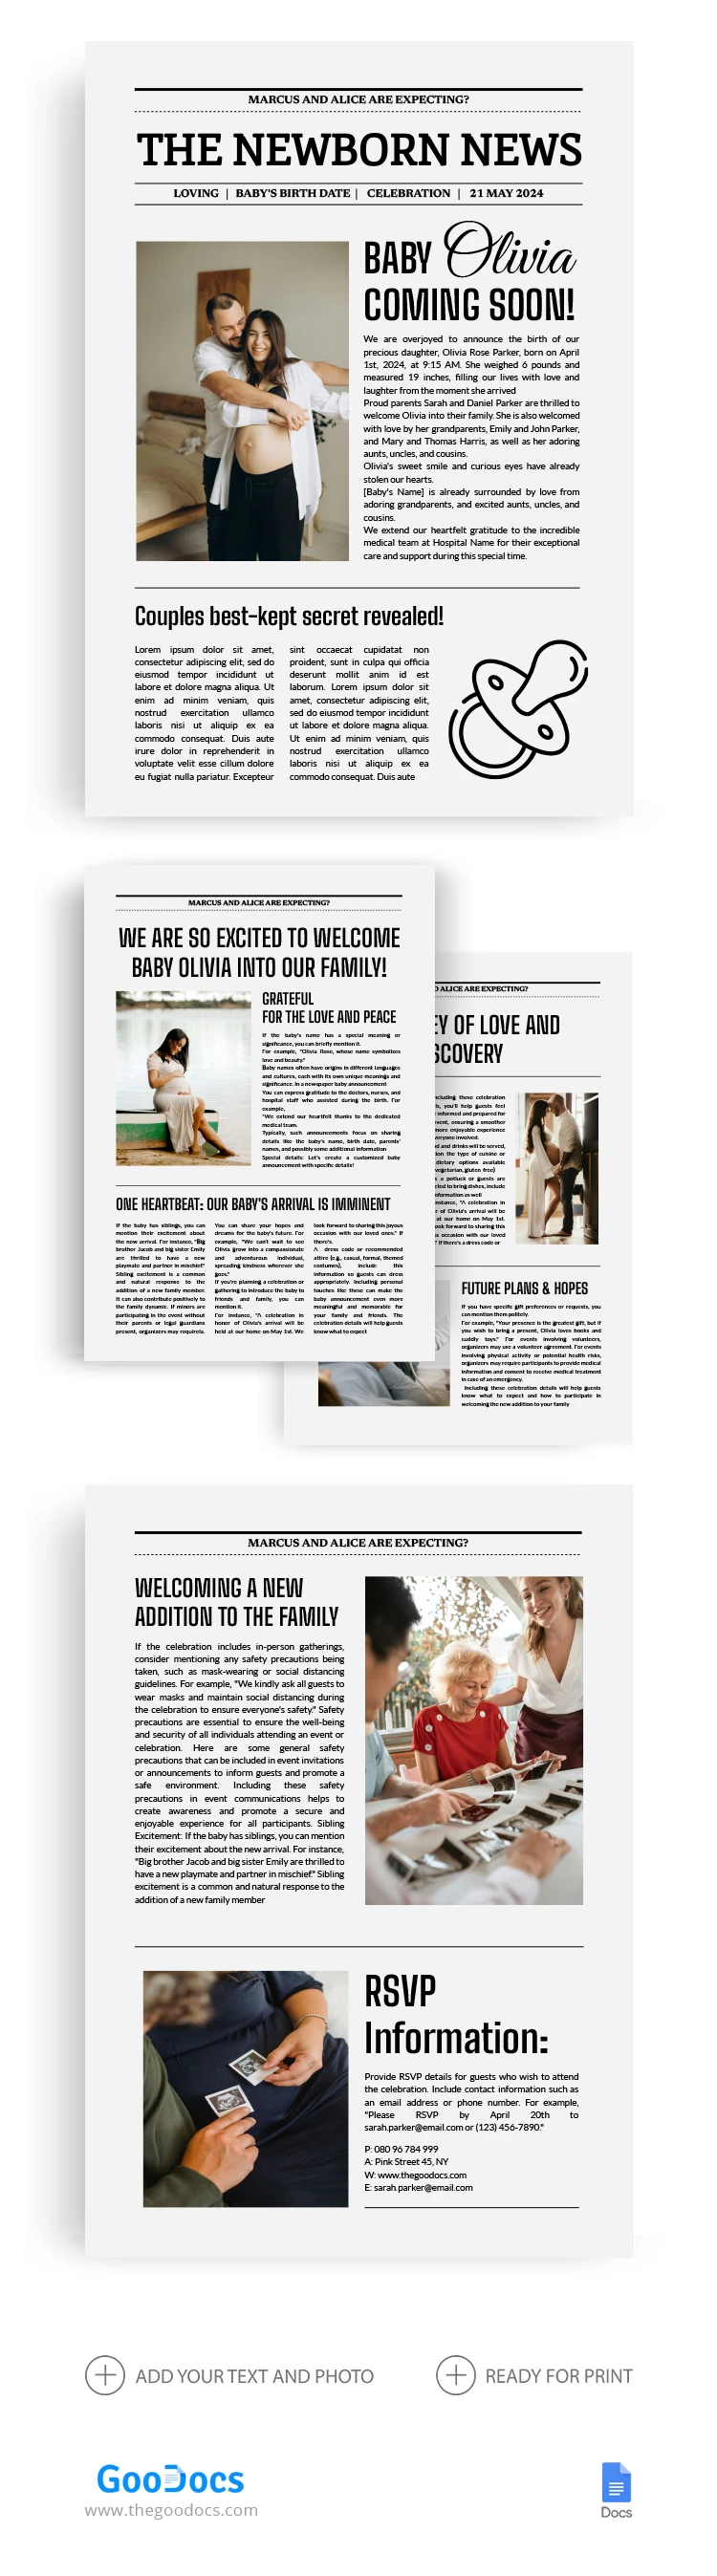 Baby Announcement Newspaper - free Google Docs Template - 10068483